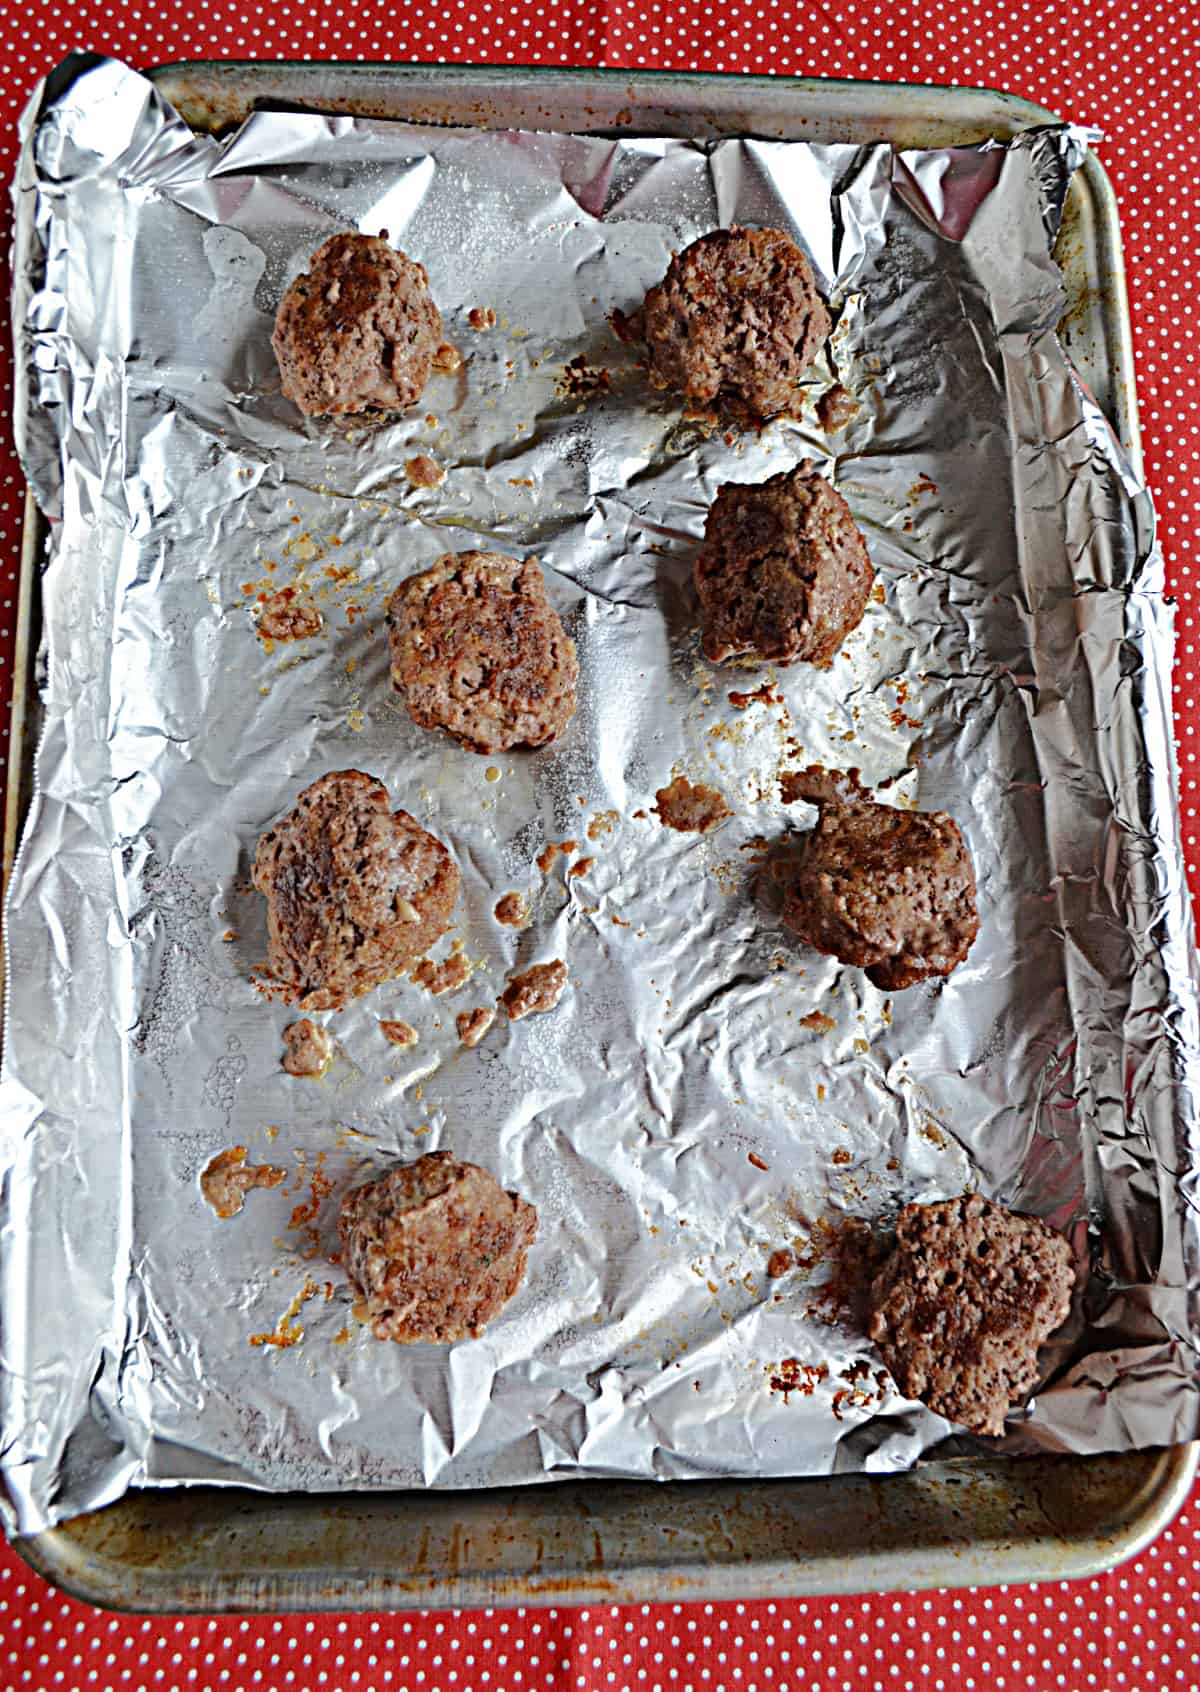 A baking sheet with meatballs on it.